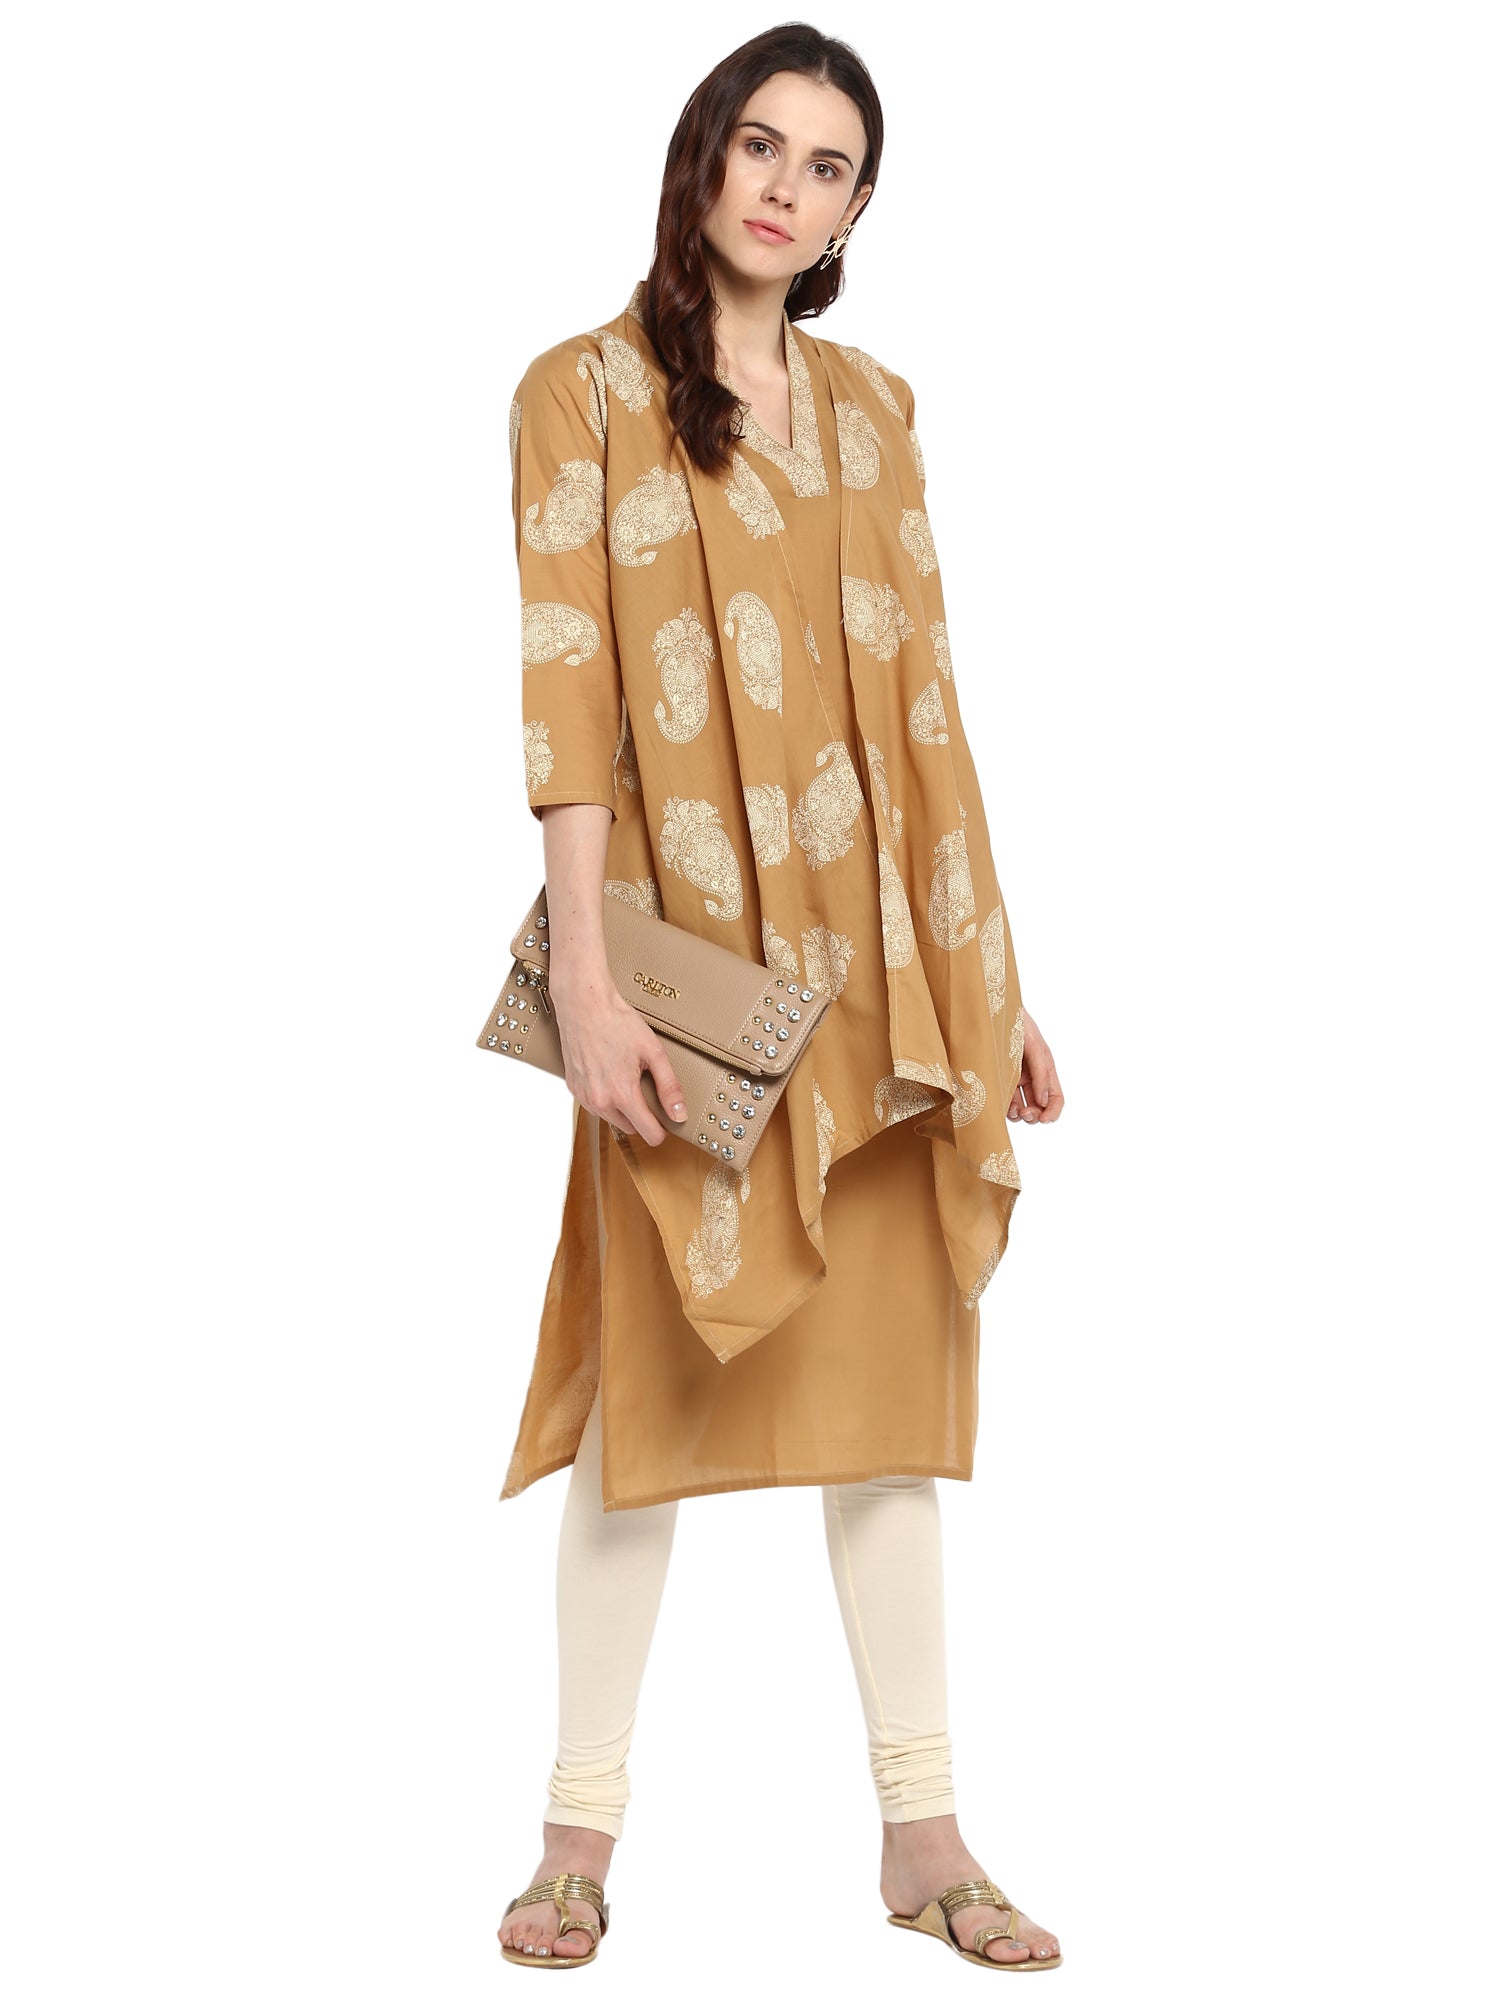 Women's Beige Printed Cotton Only Kurta With Attached Cape Scarf Extensions - Ahalyaa